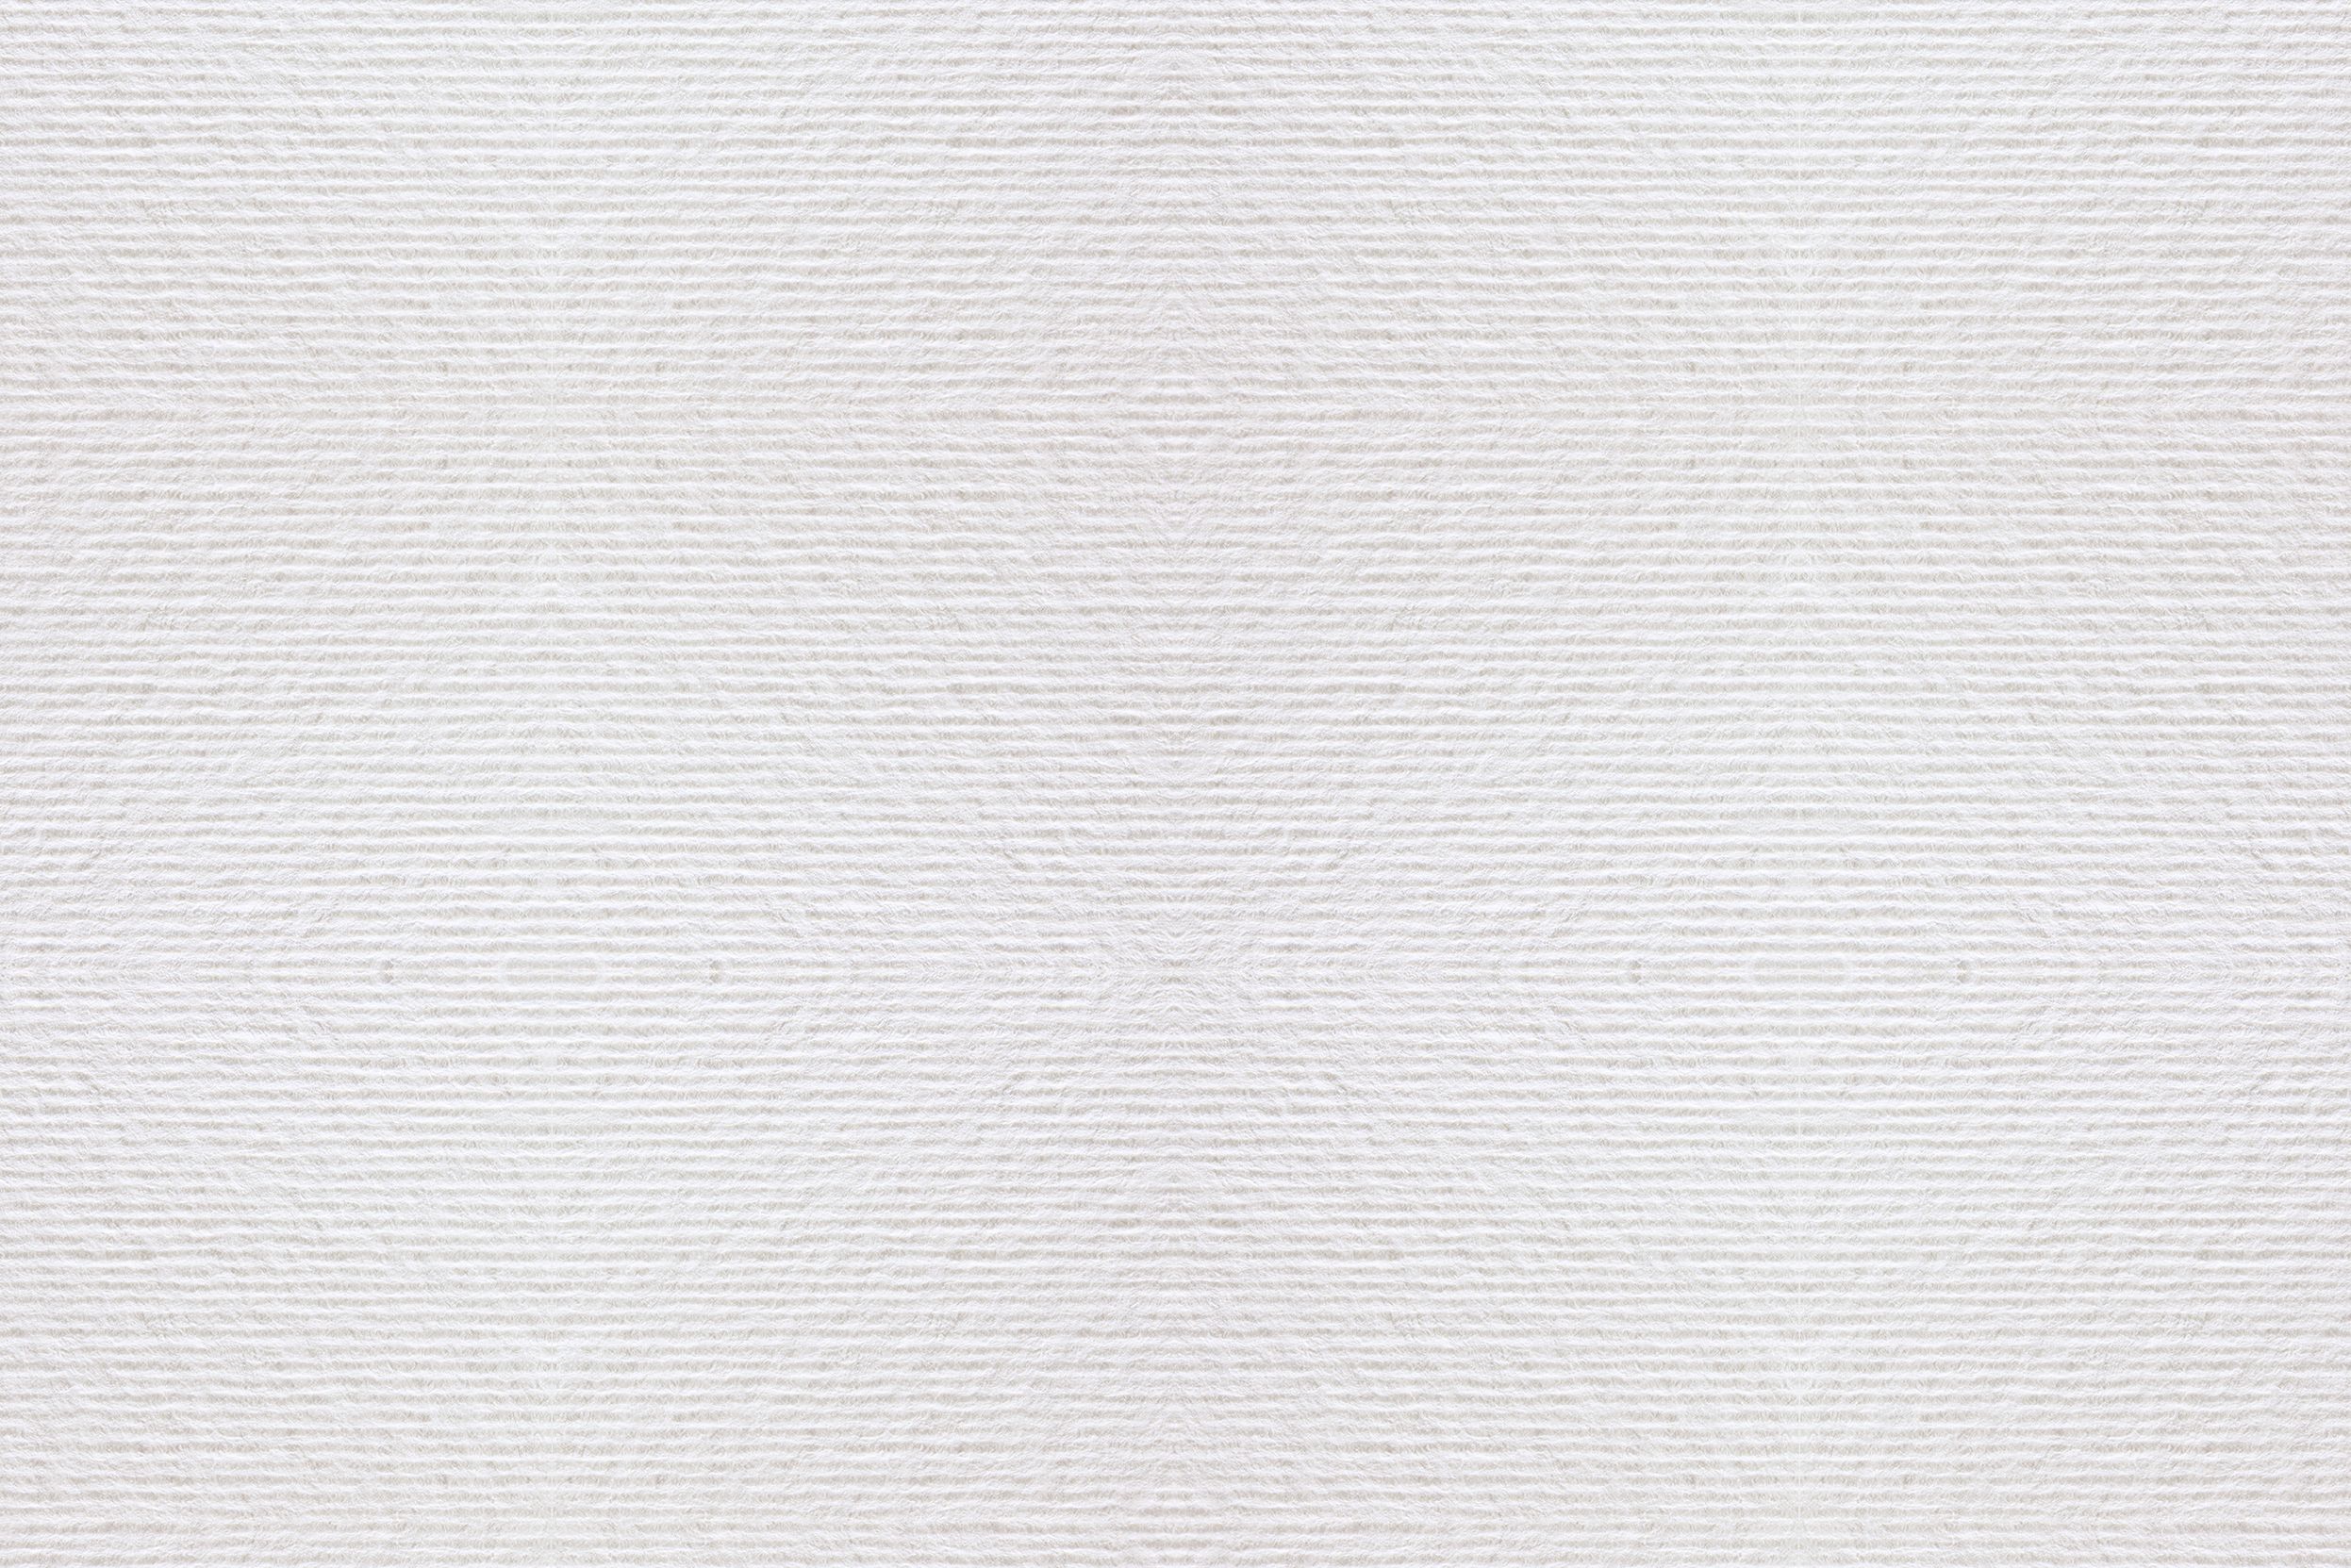 Acquerello White (strip, square cut): Natural paper made of FSC certified pure cellulose. Surface embossed with parallel lines. Producer: Fedrigoni